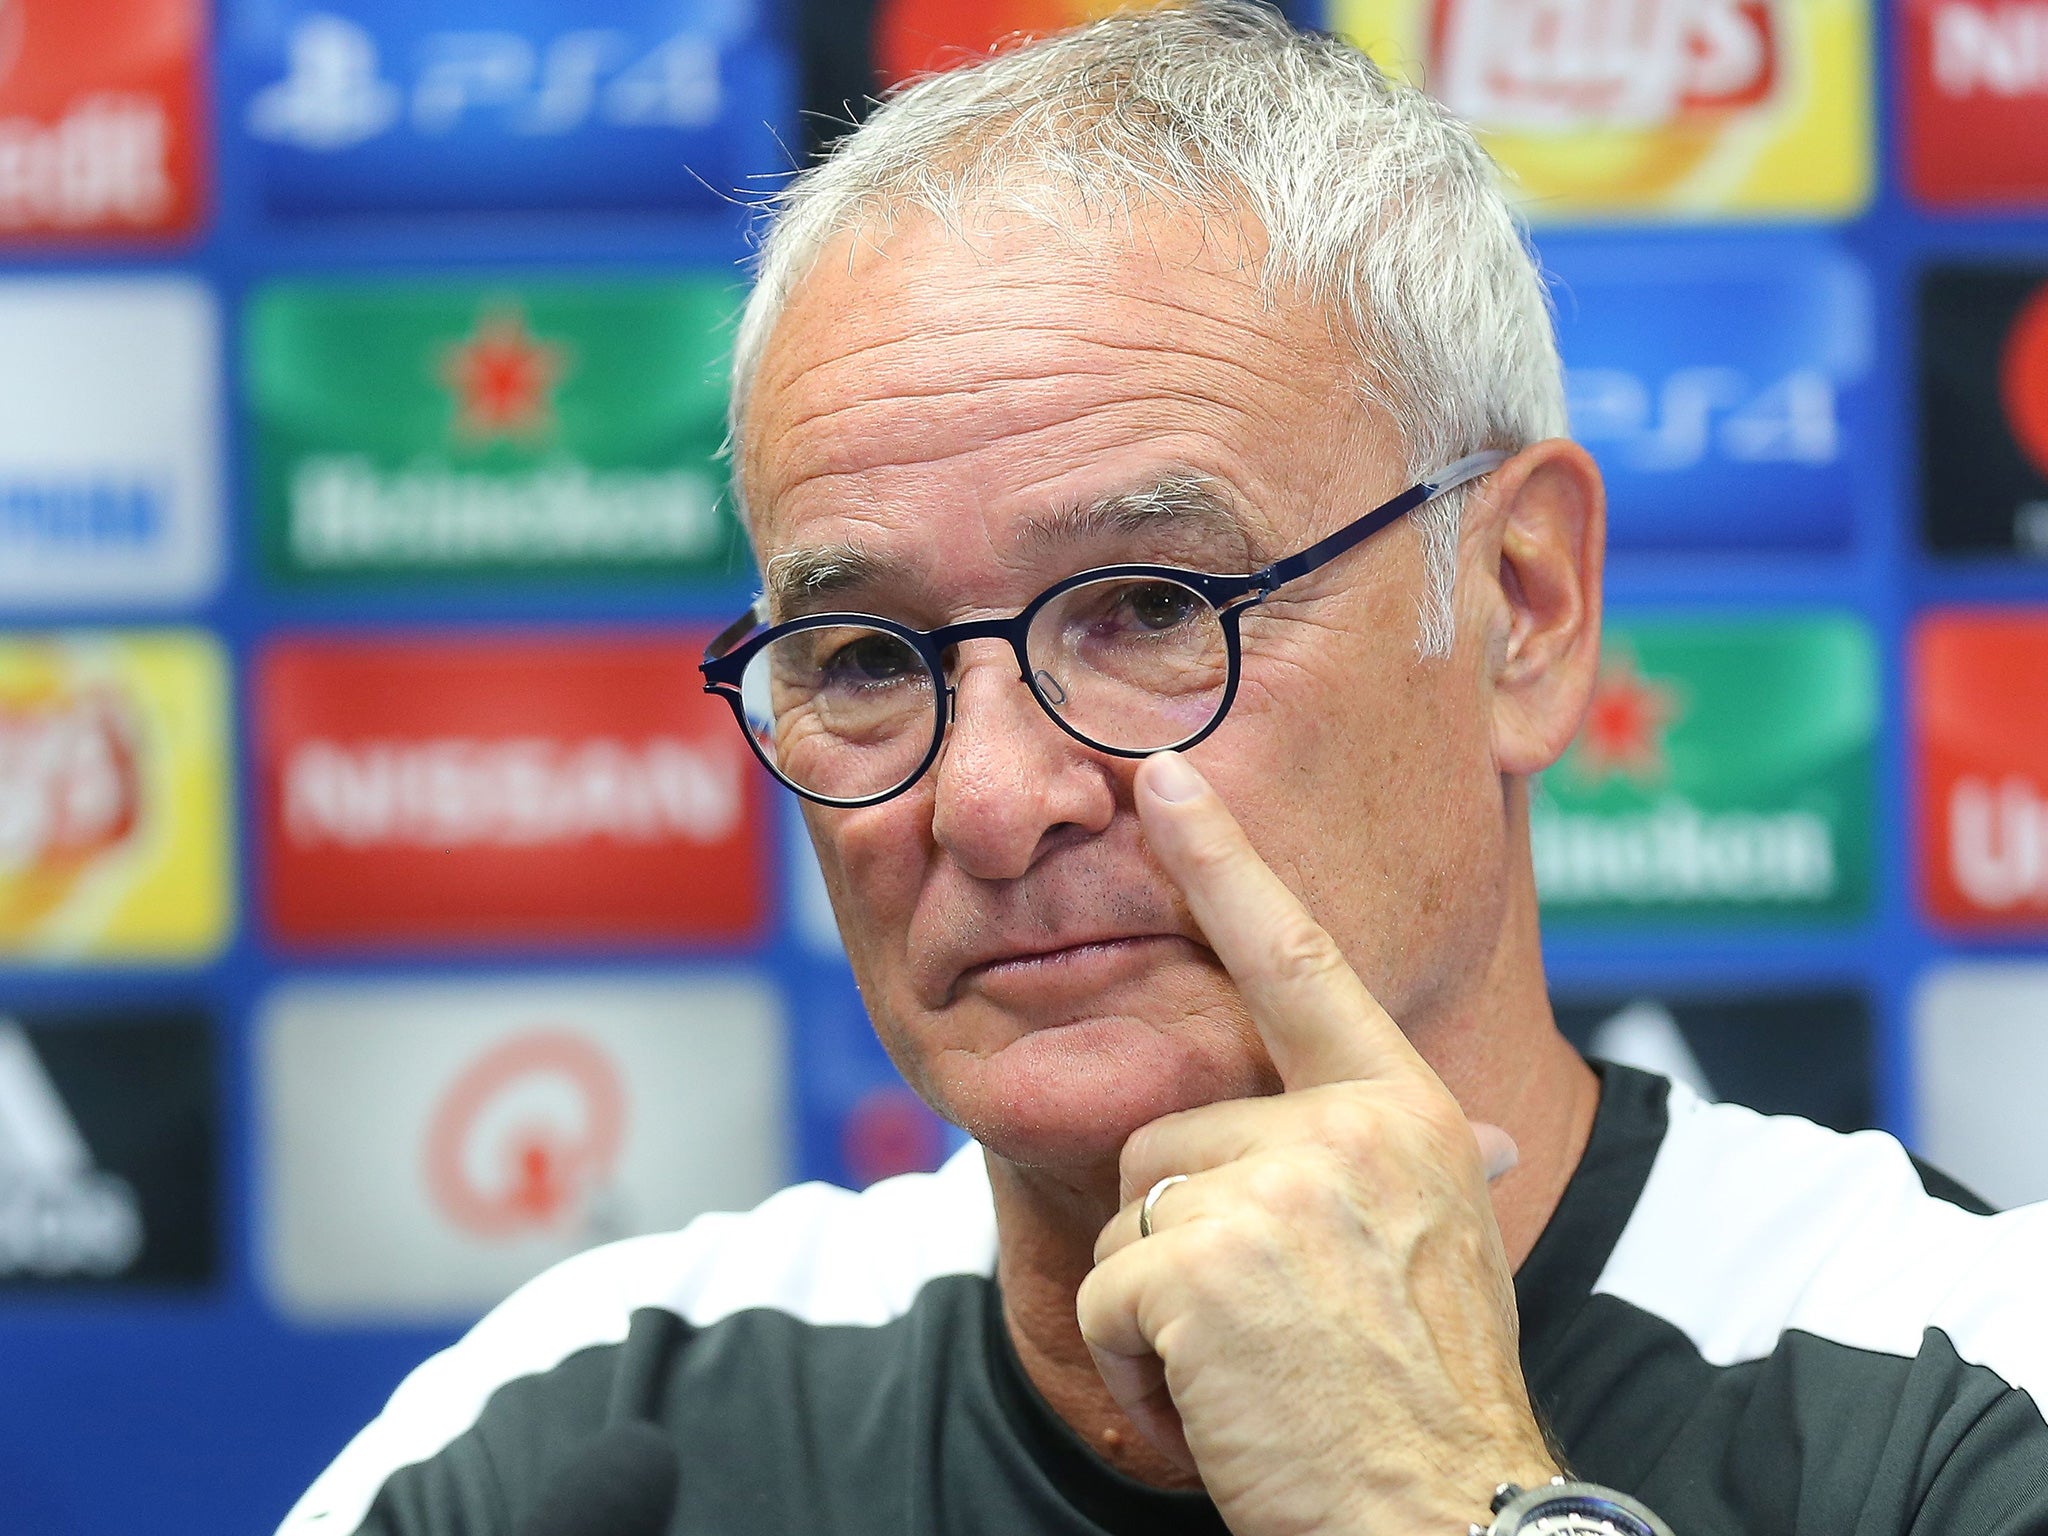 Ranieri played down hopes of lightning striking twice for Leicester